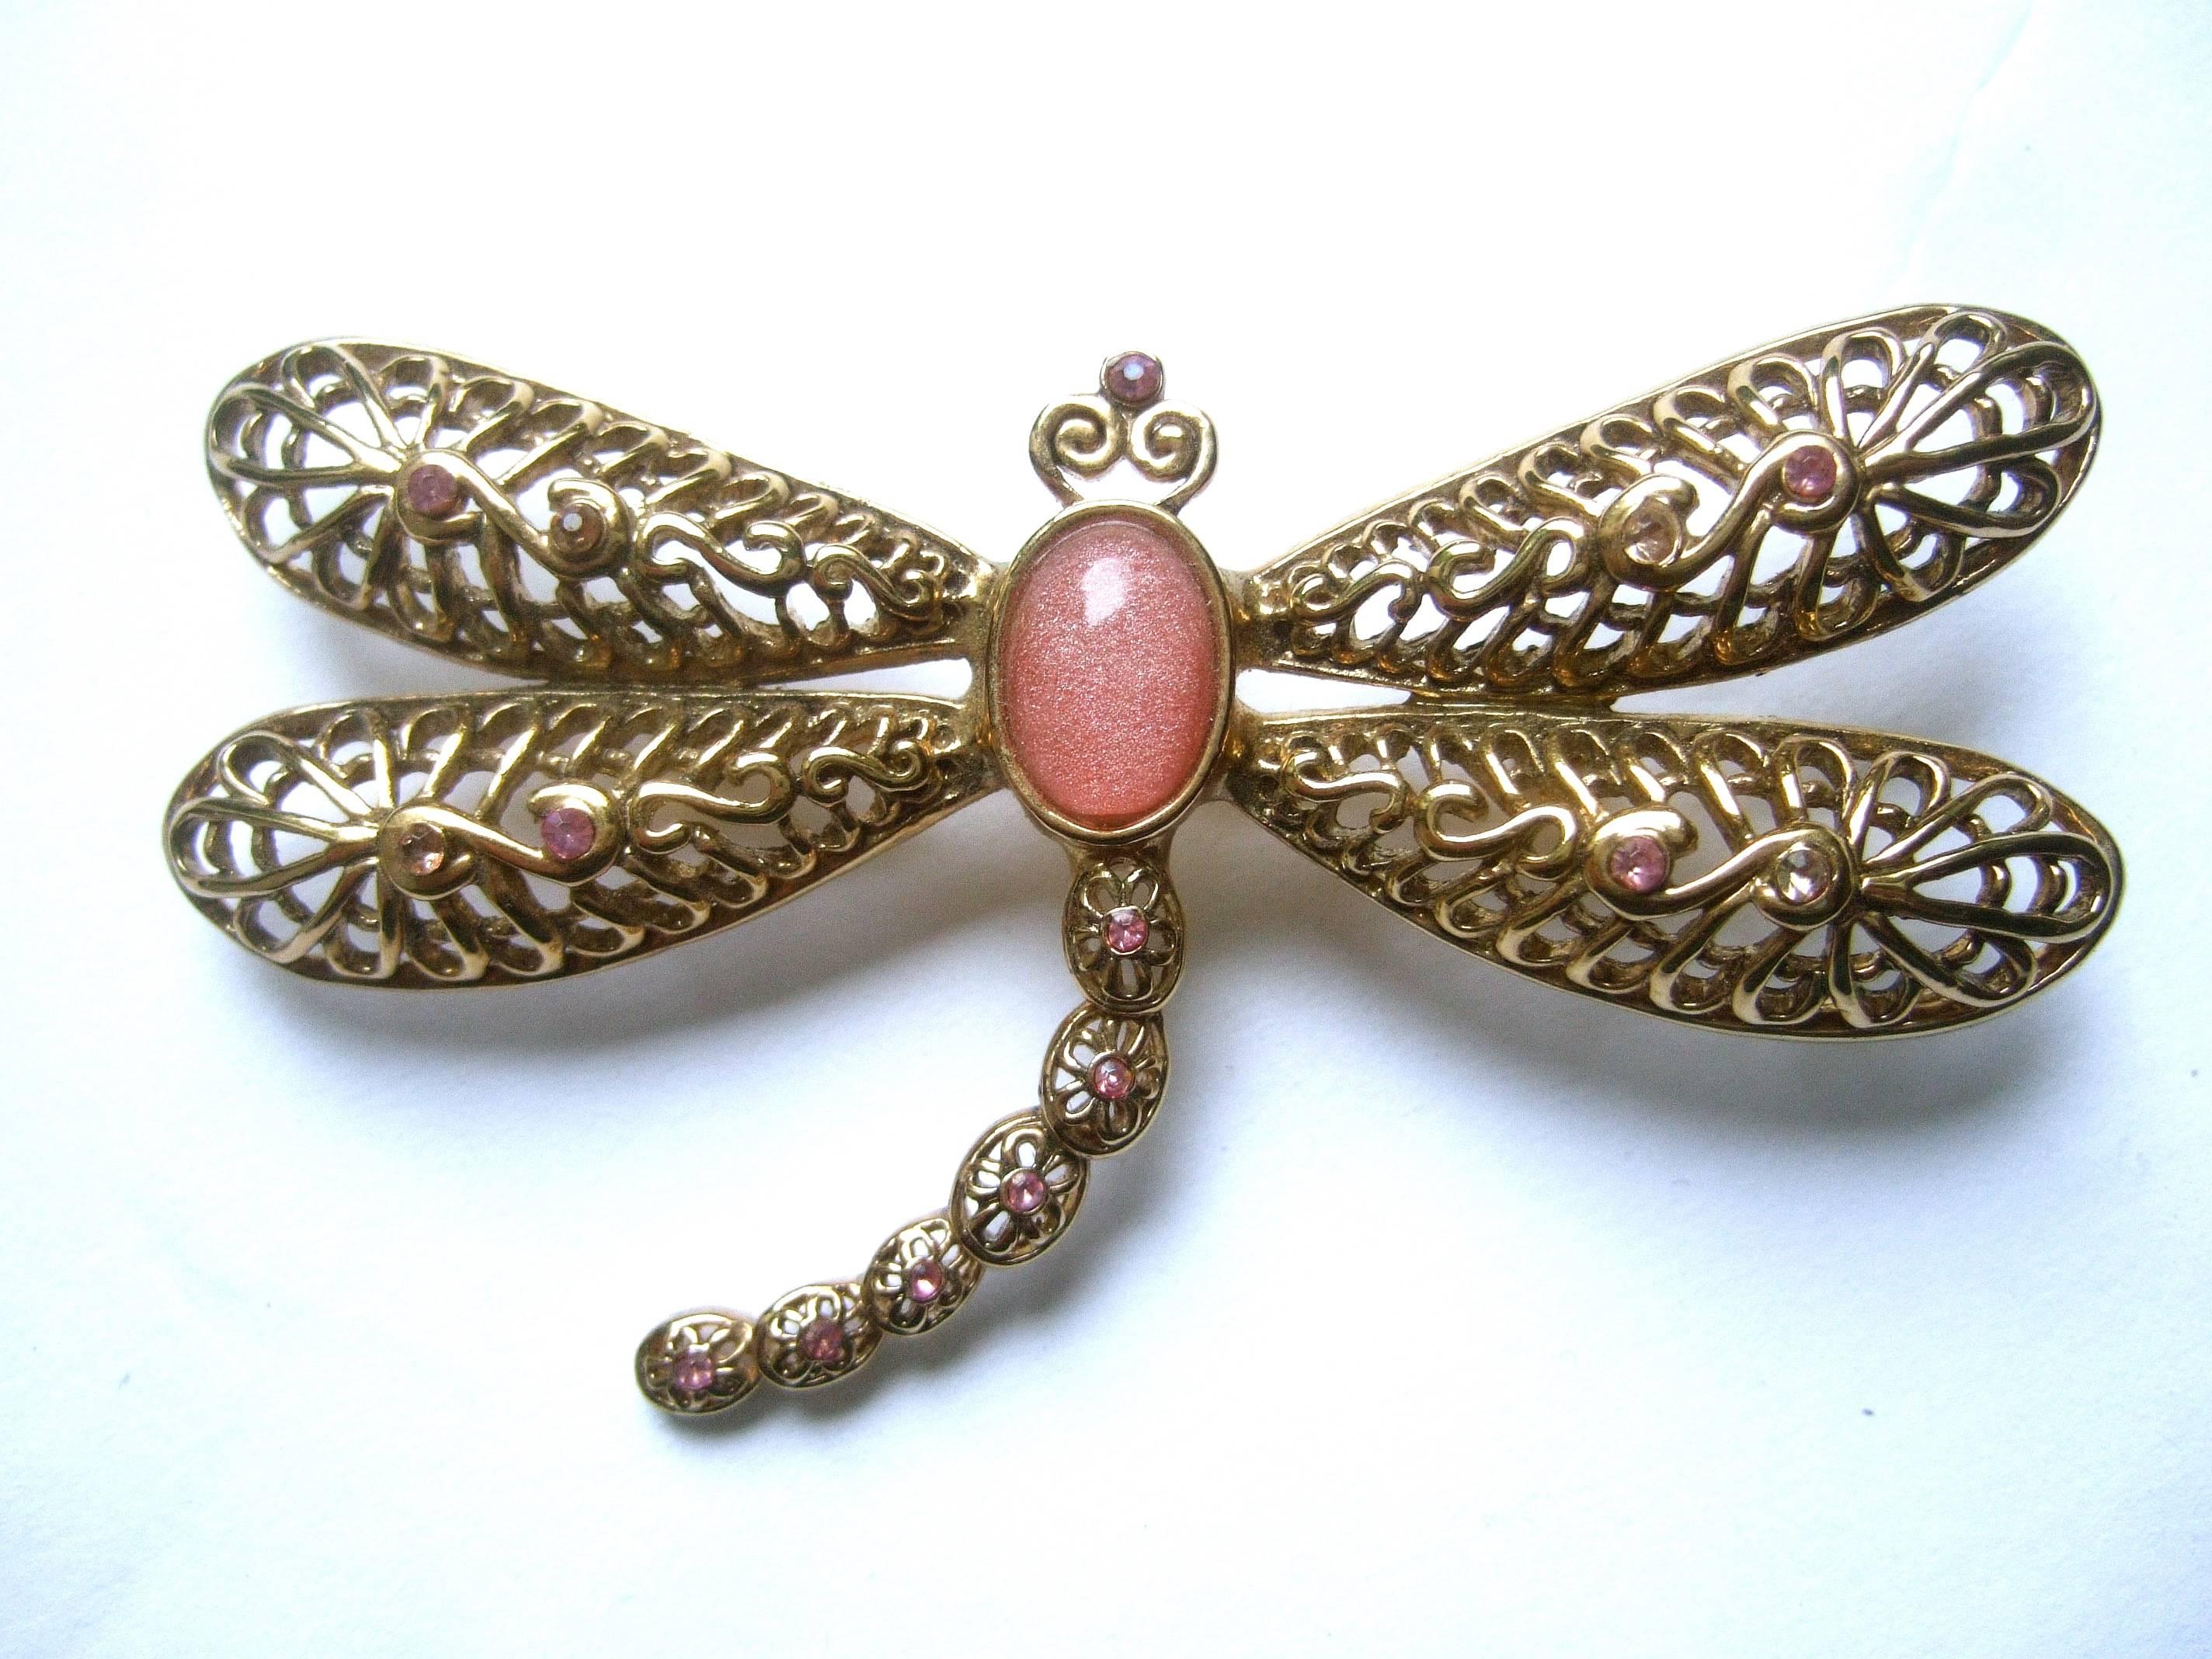 Exquisite massive crystal dragonfly brooch 
The stylized dragonfly brooch is designed 
with sinus bands of gilt metal

The wings and tail are embellished with 
tiny restrained pink crystals. The body
is adorned with a pale pink cabochon  

The